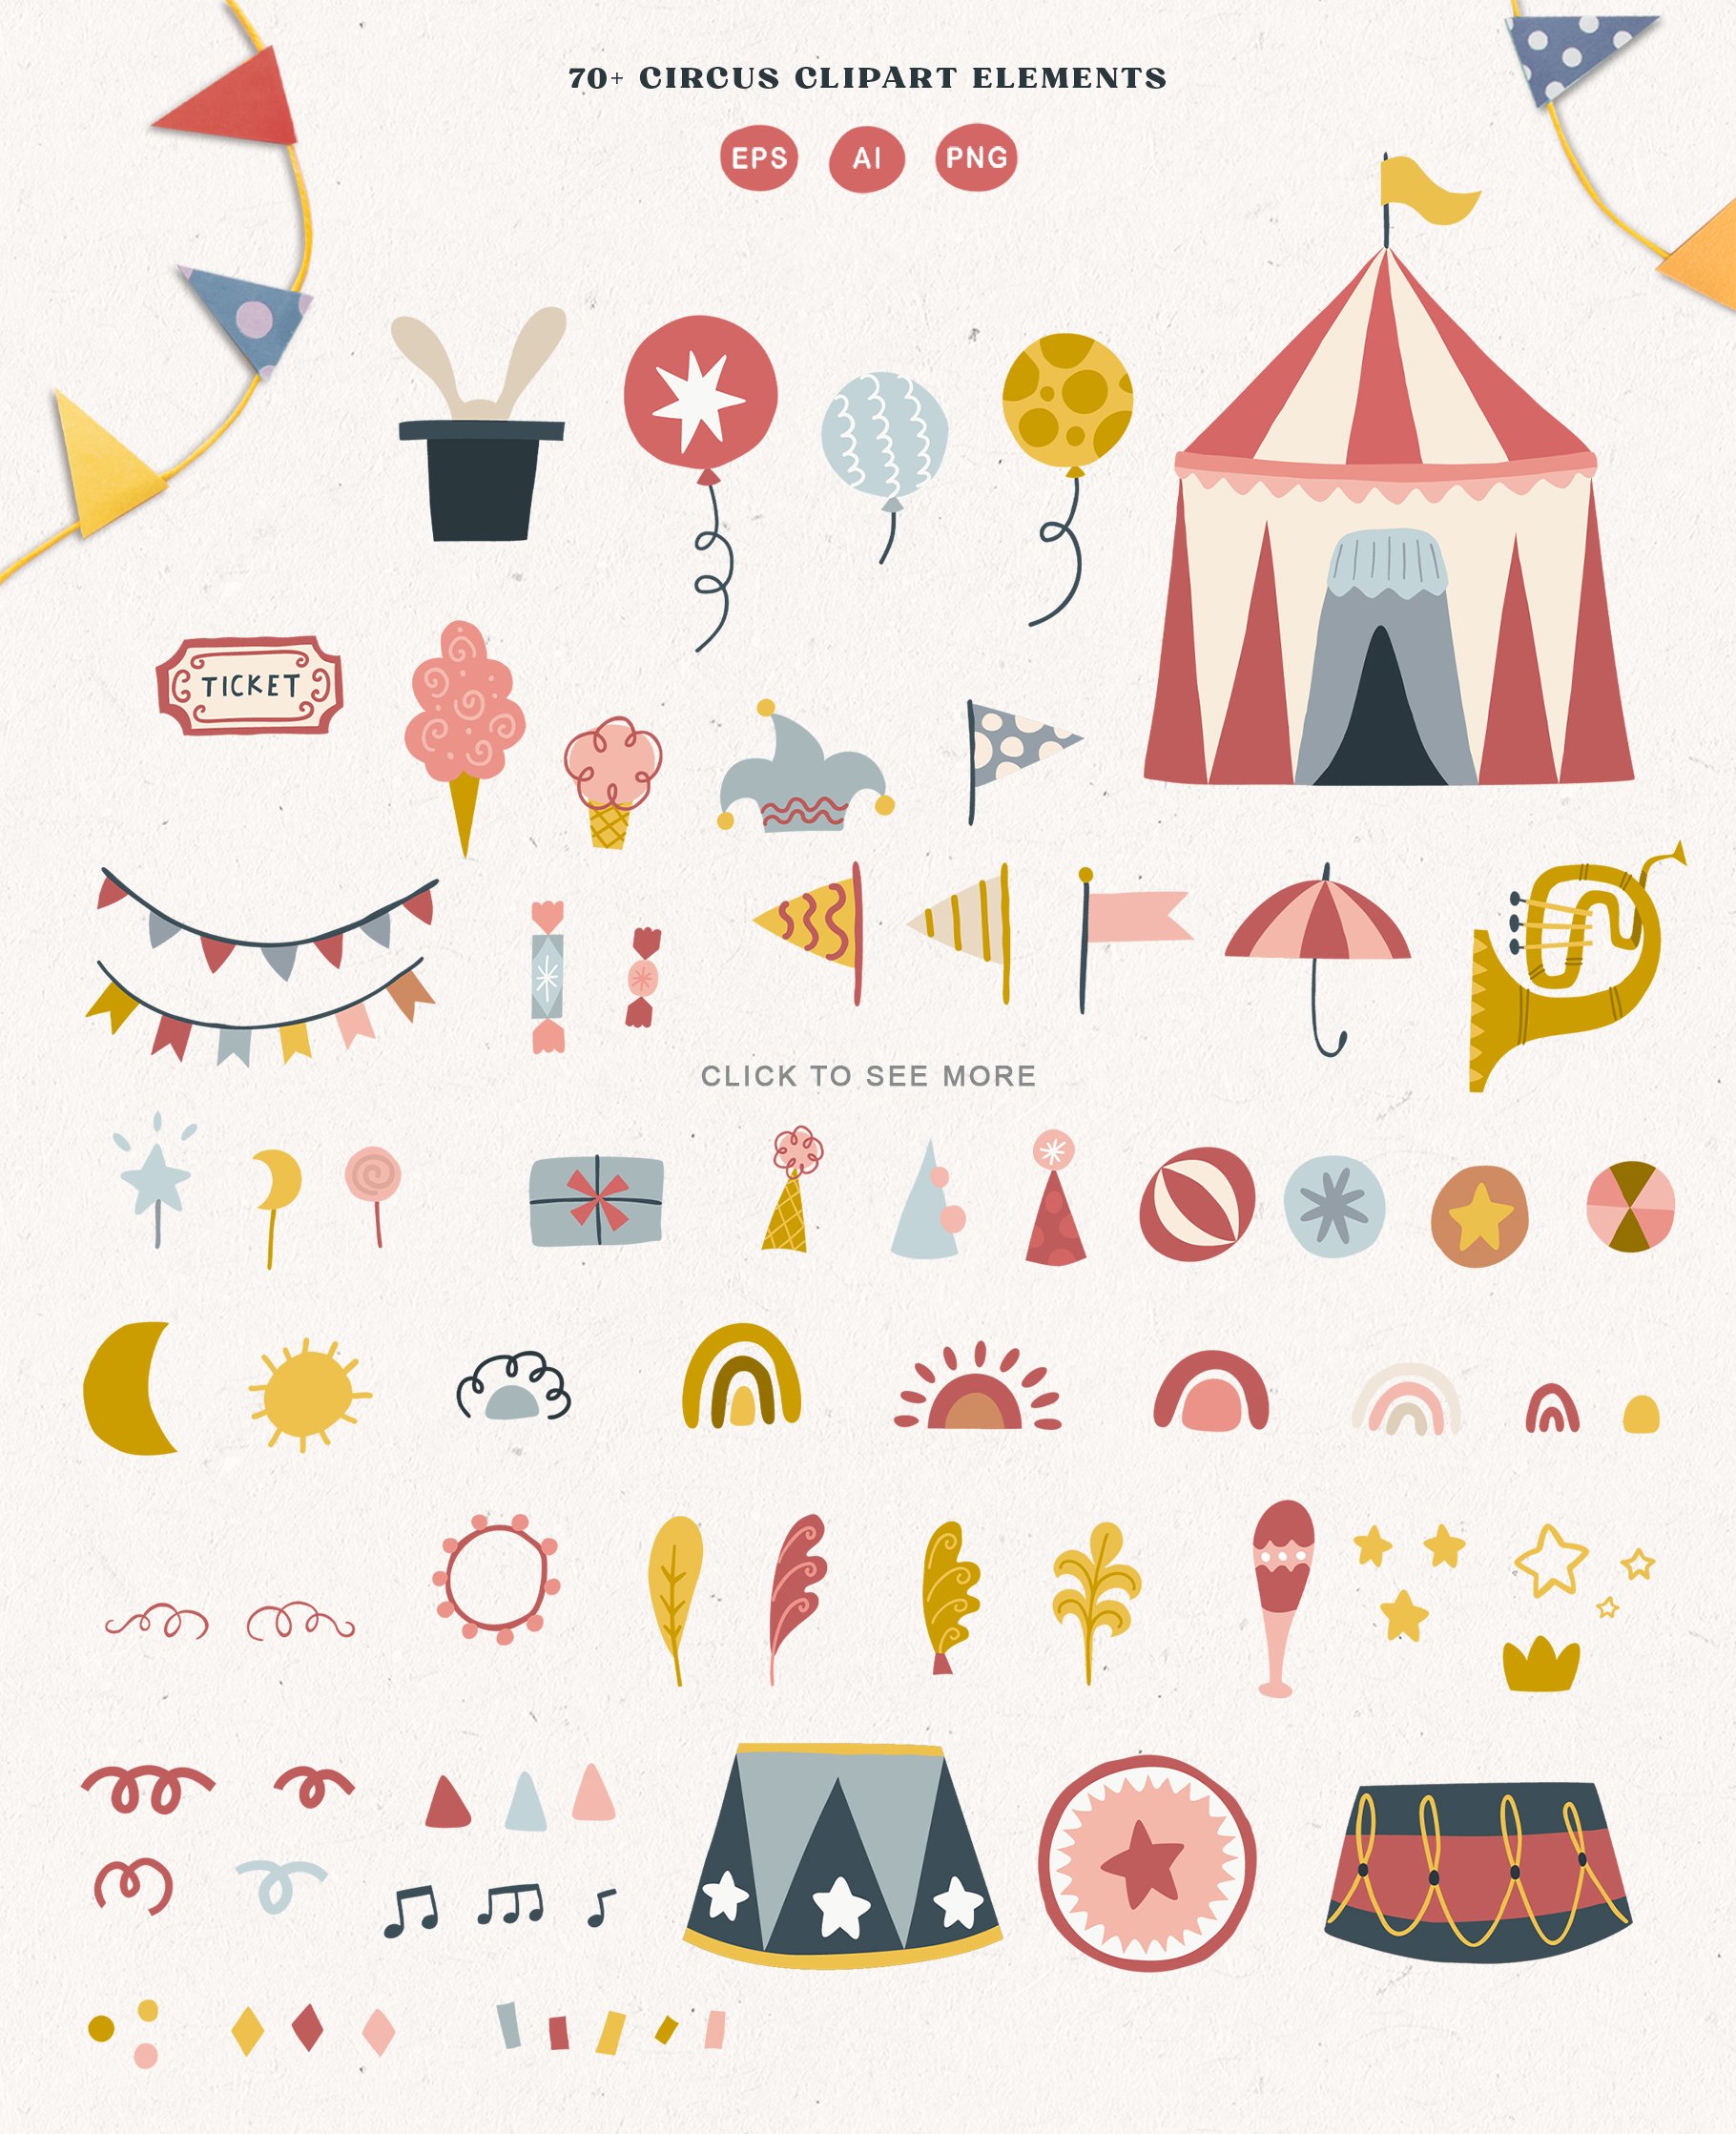 Circus clipart elements preview.